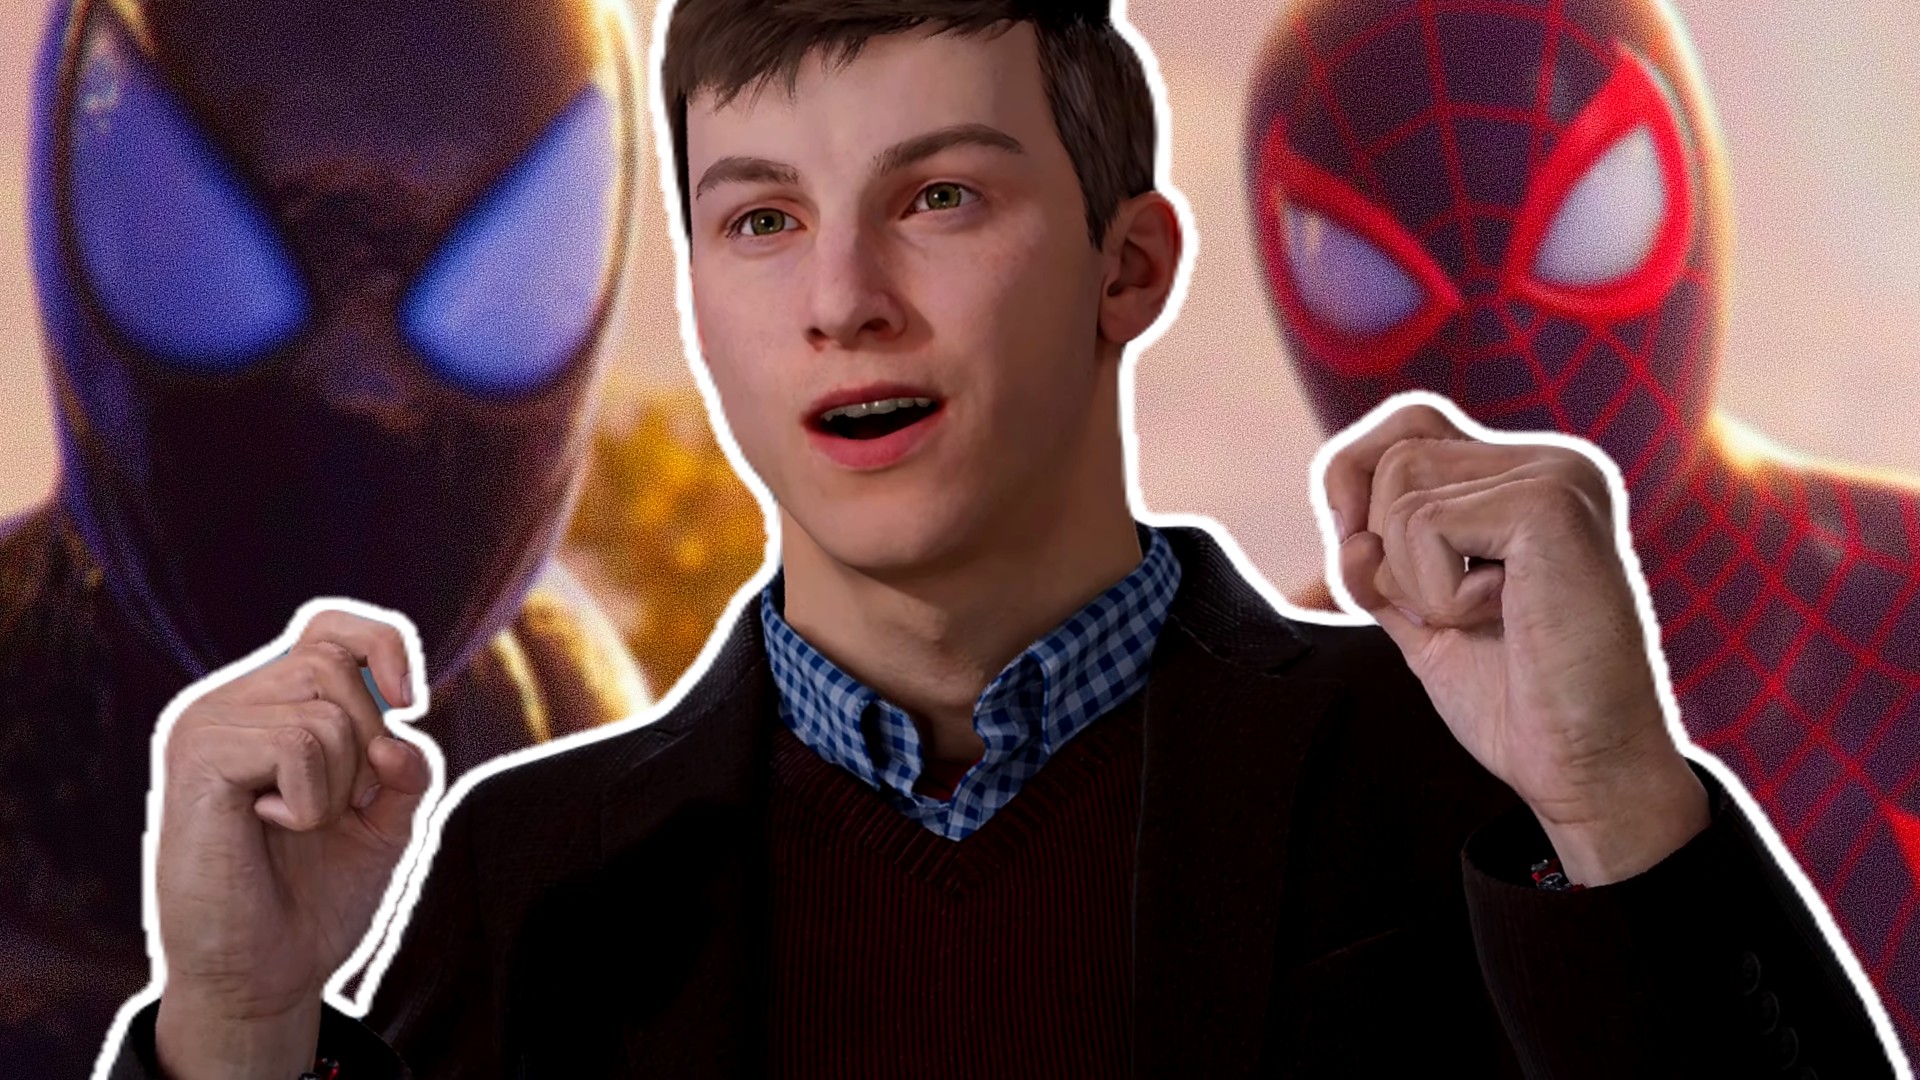 We are now EXACTLY ONE WEEK AWAY from the Marvel's Spider-Man 2